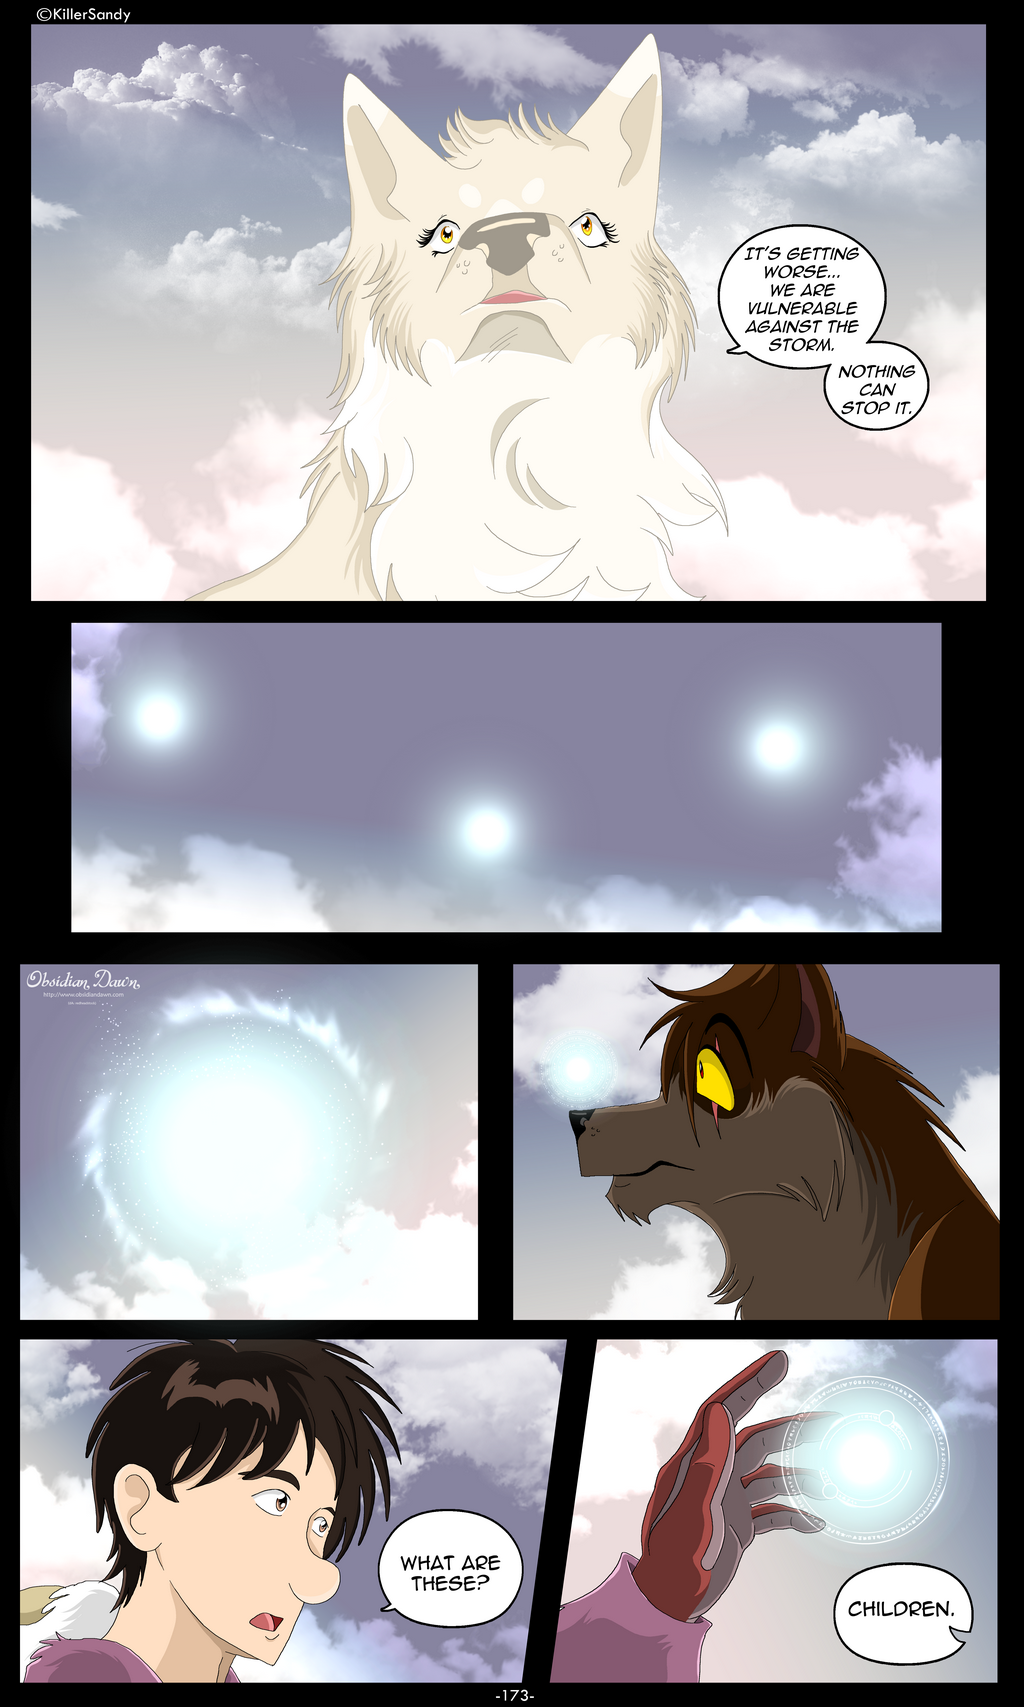 The Prince of the Moonlight Stone page 173